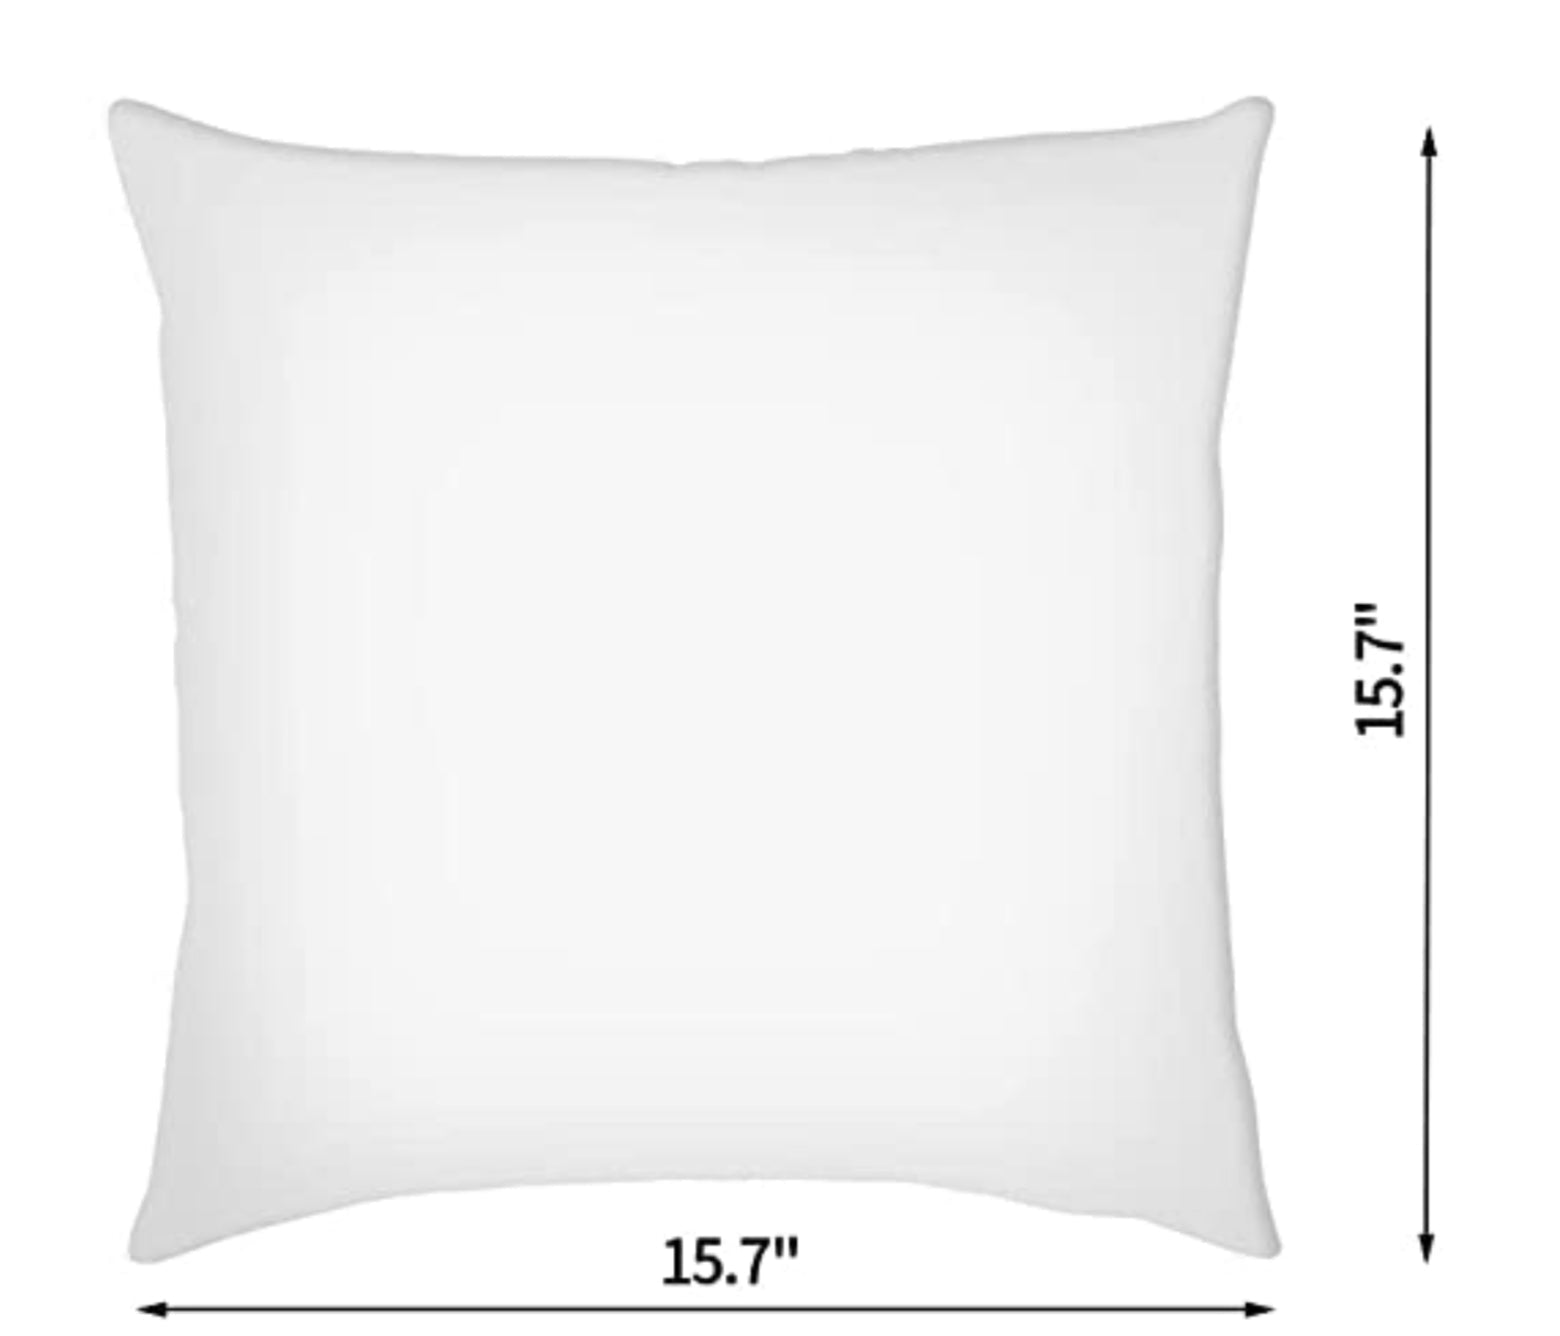 Everyone Was Thinking It, I Just Said It - Cushion Cover